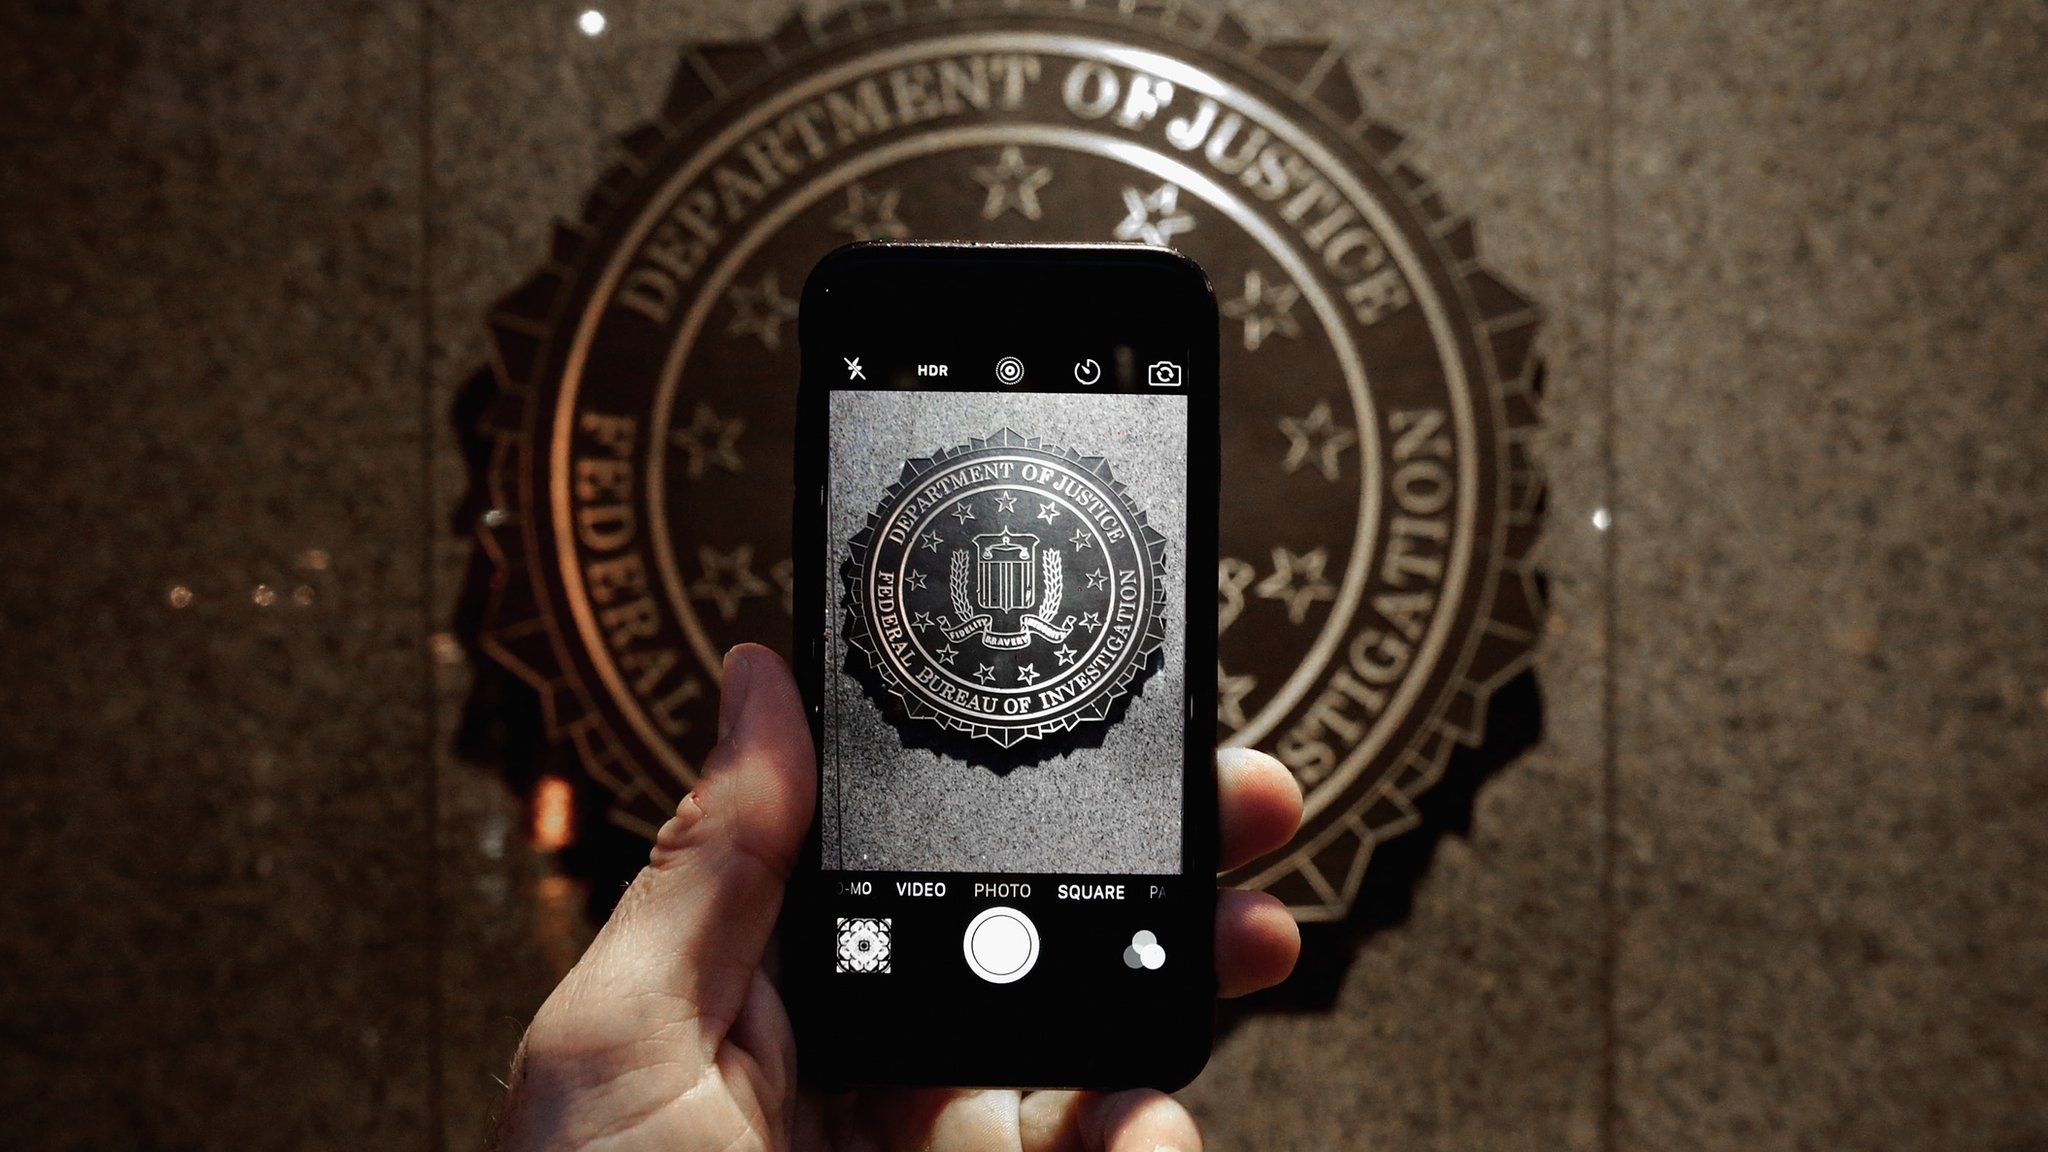 Official seal of the FBI is seen on an iPhone's camera screen on February 23, 2016 in Washington DC